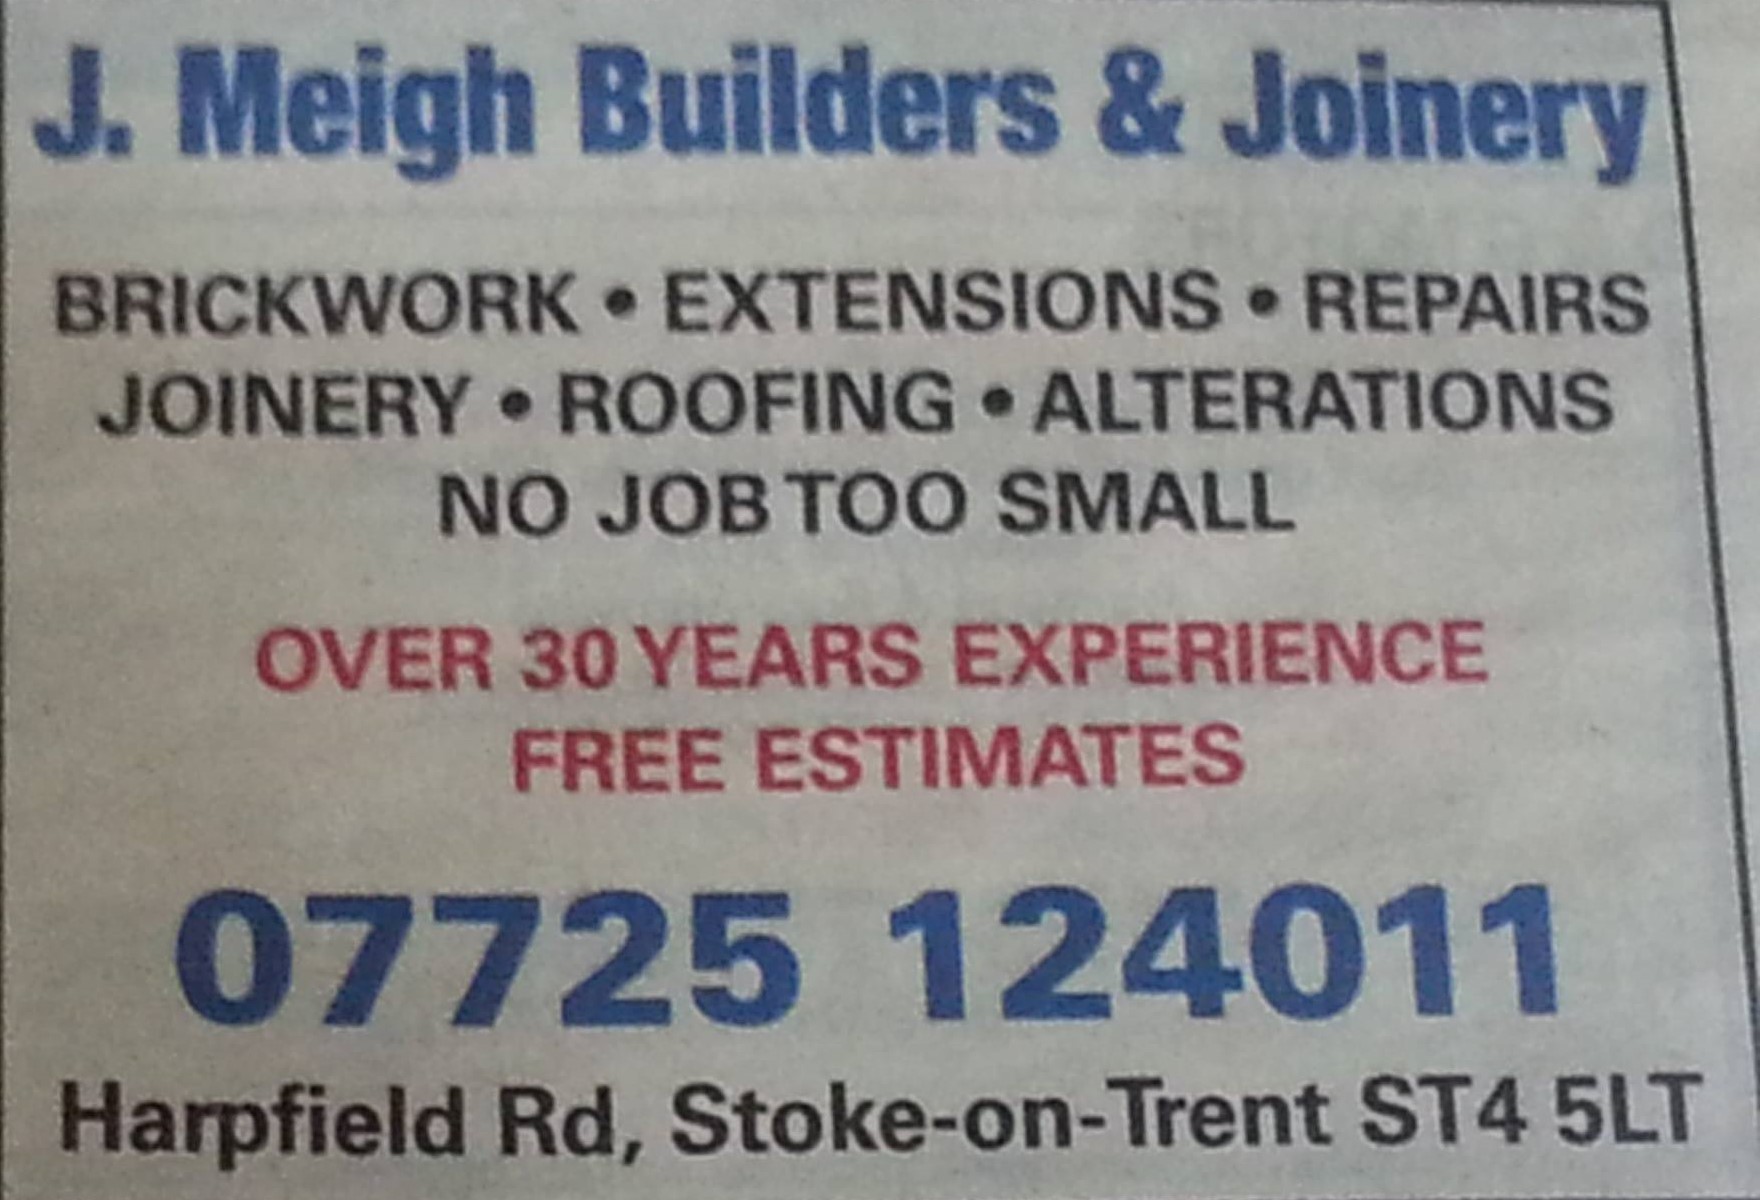 Main photo for J. Meigh Builders & Joinery